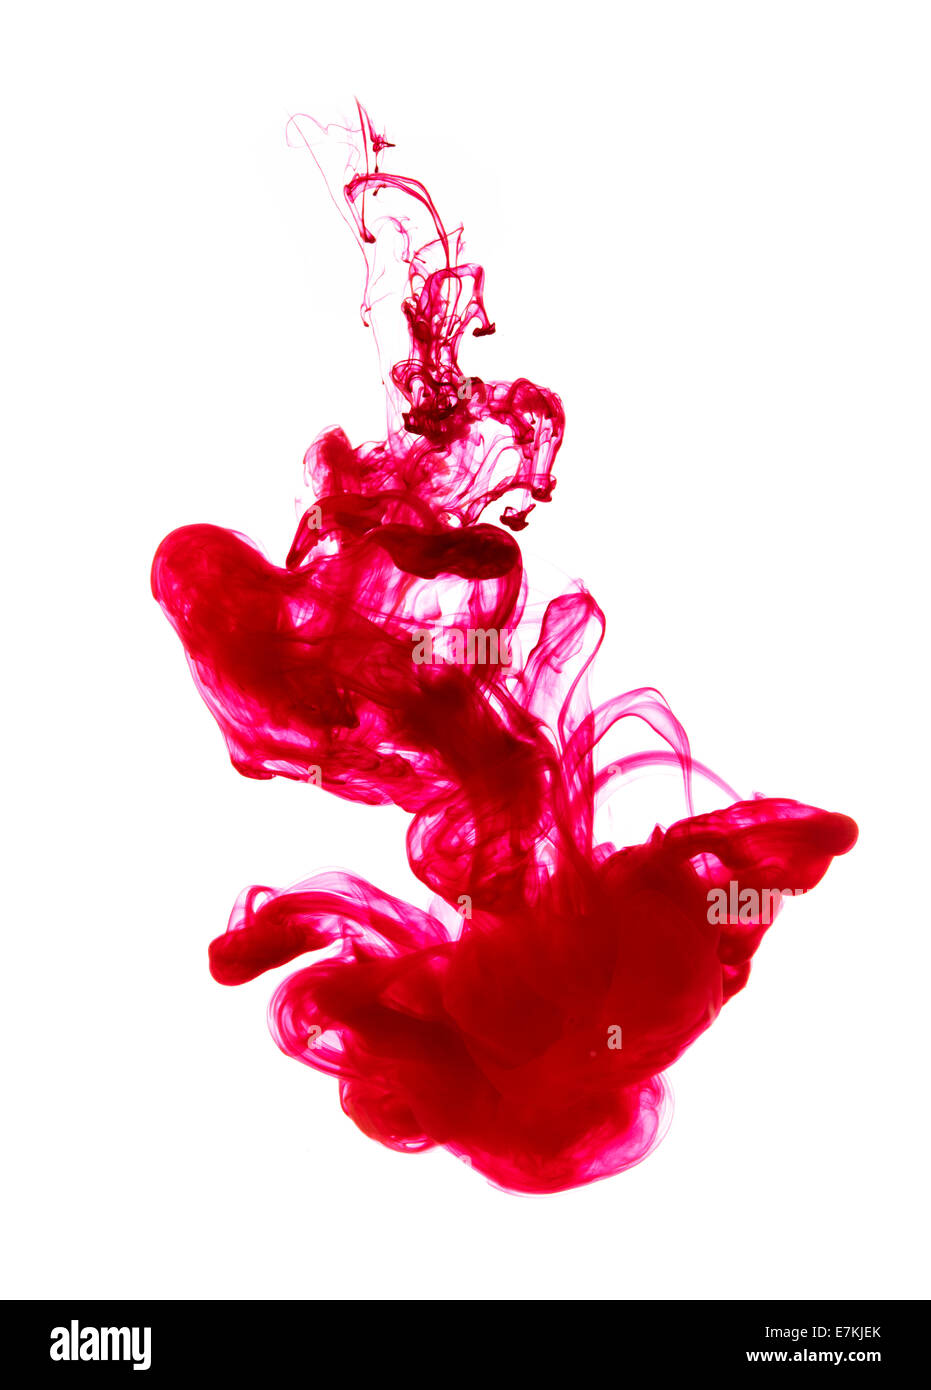 Red Ink in water Stock Photo